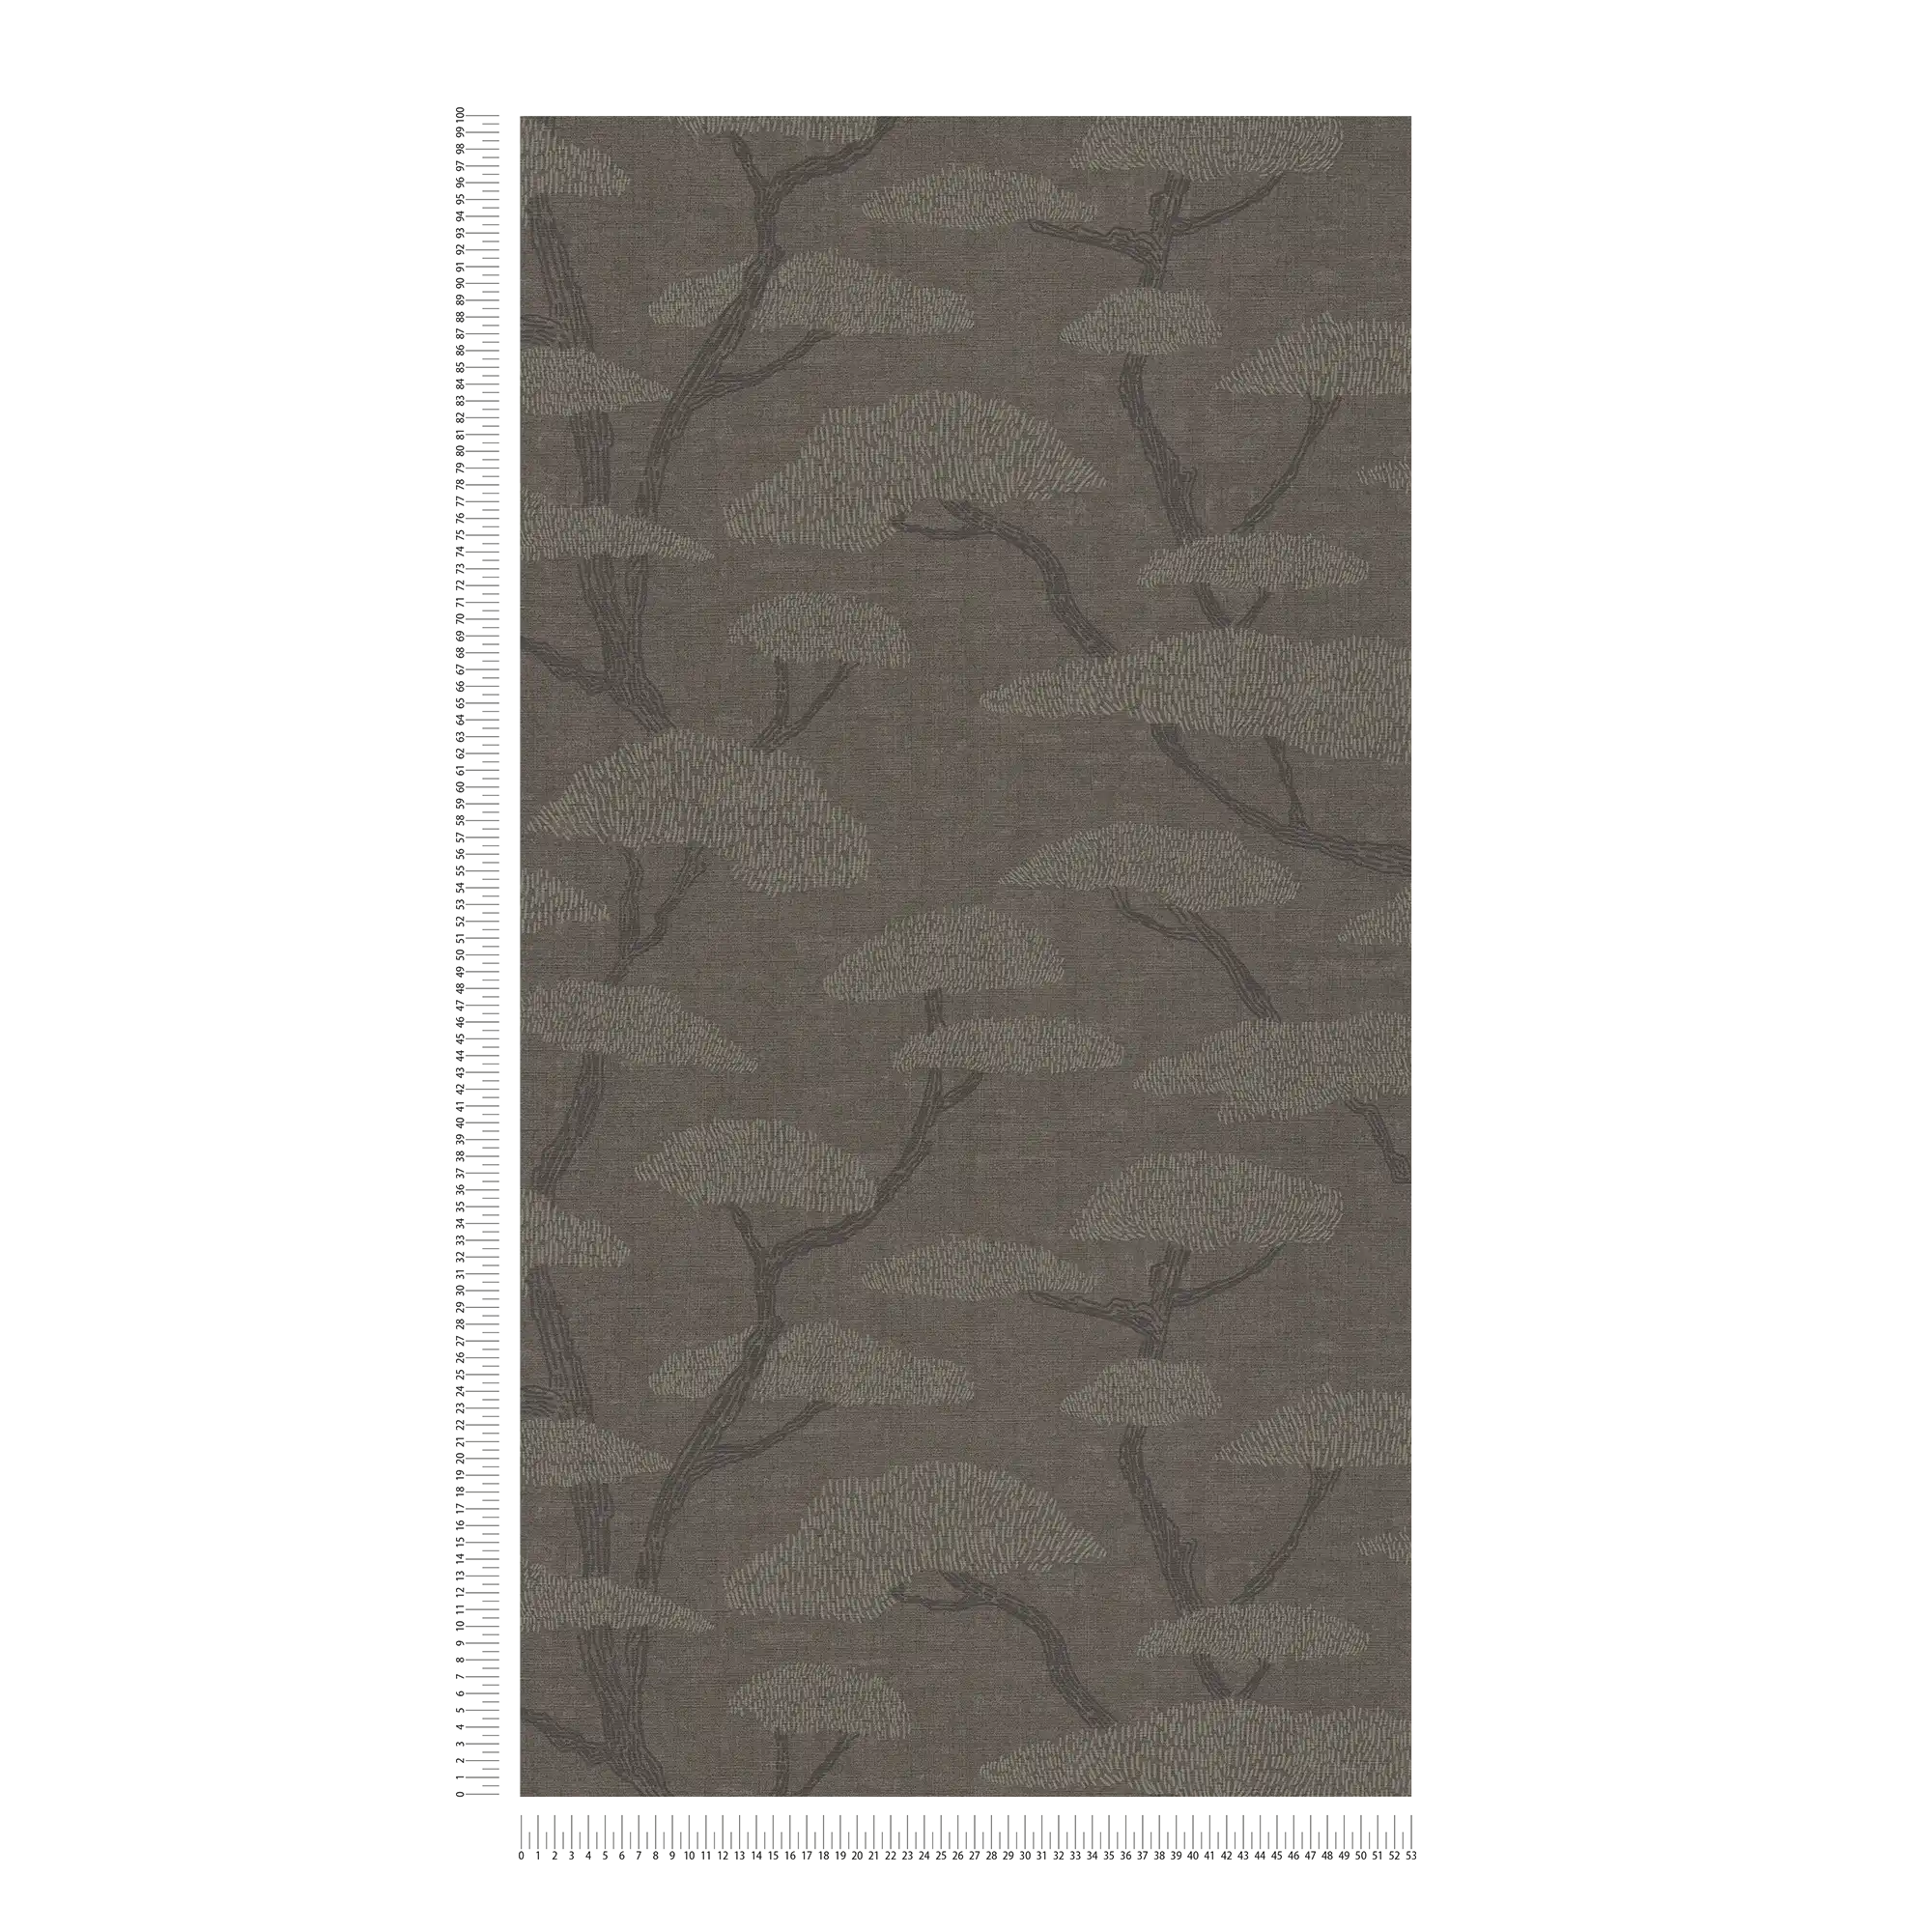             Anthracite wallpaper with tree motif in vintage style
        